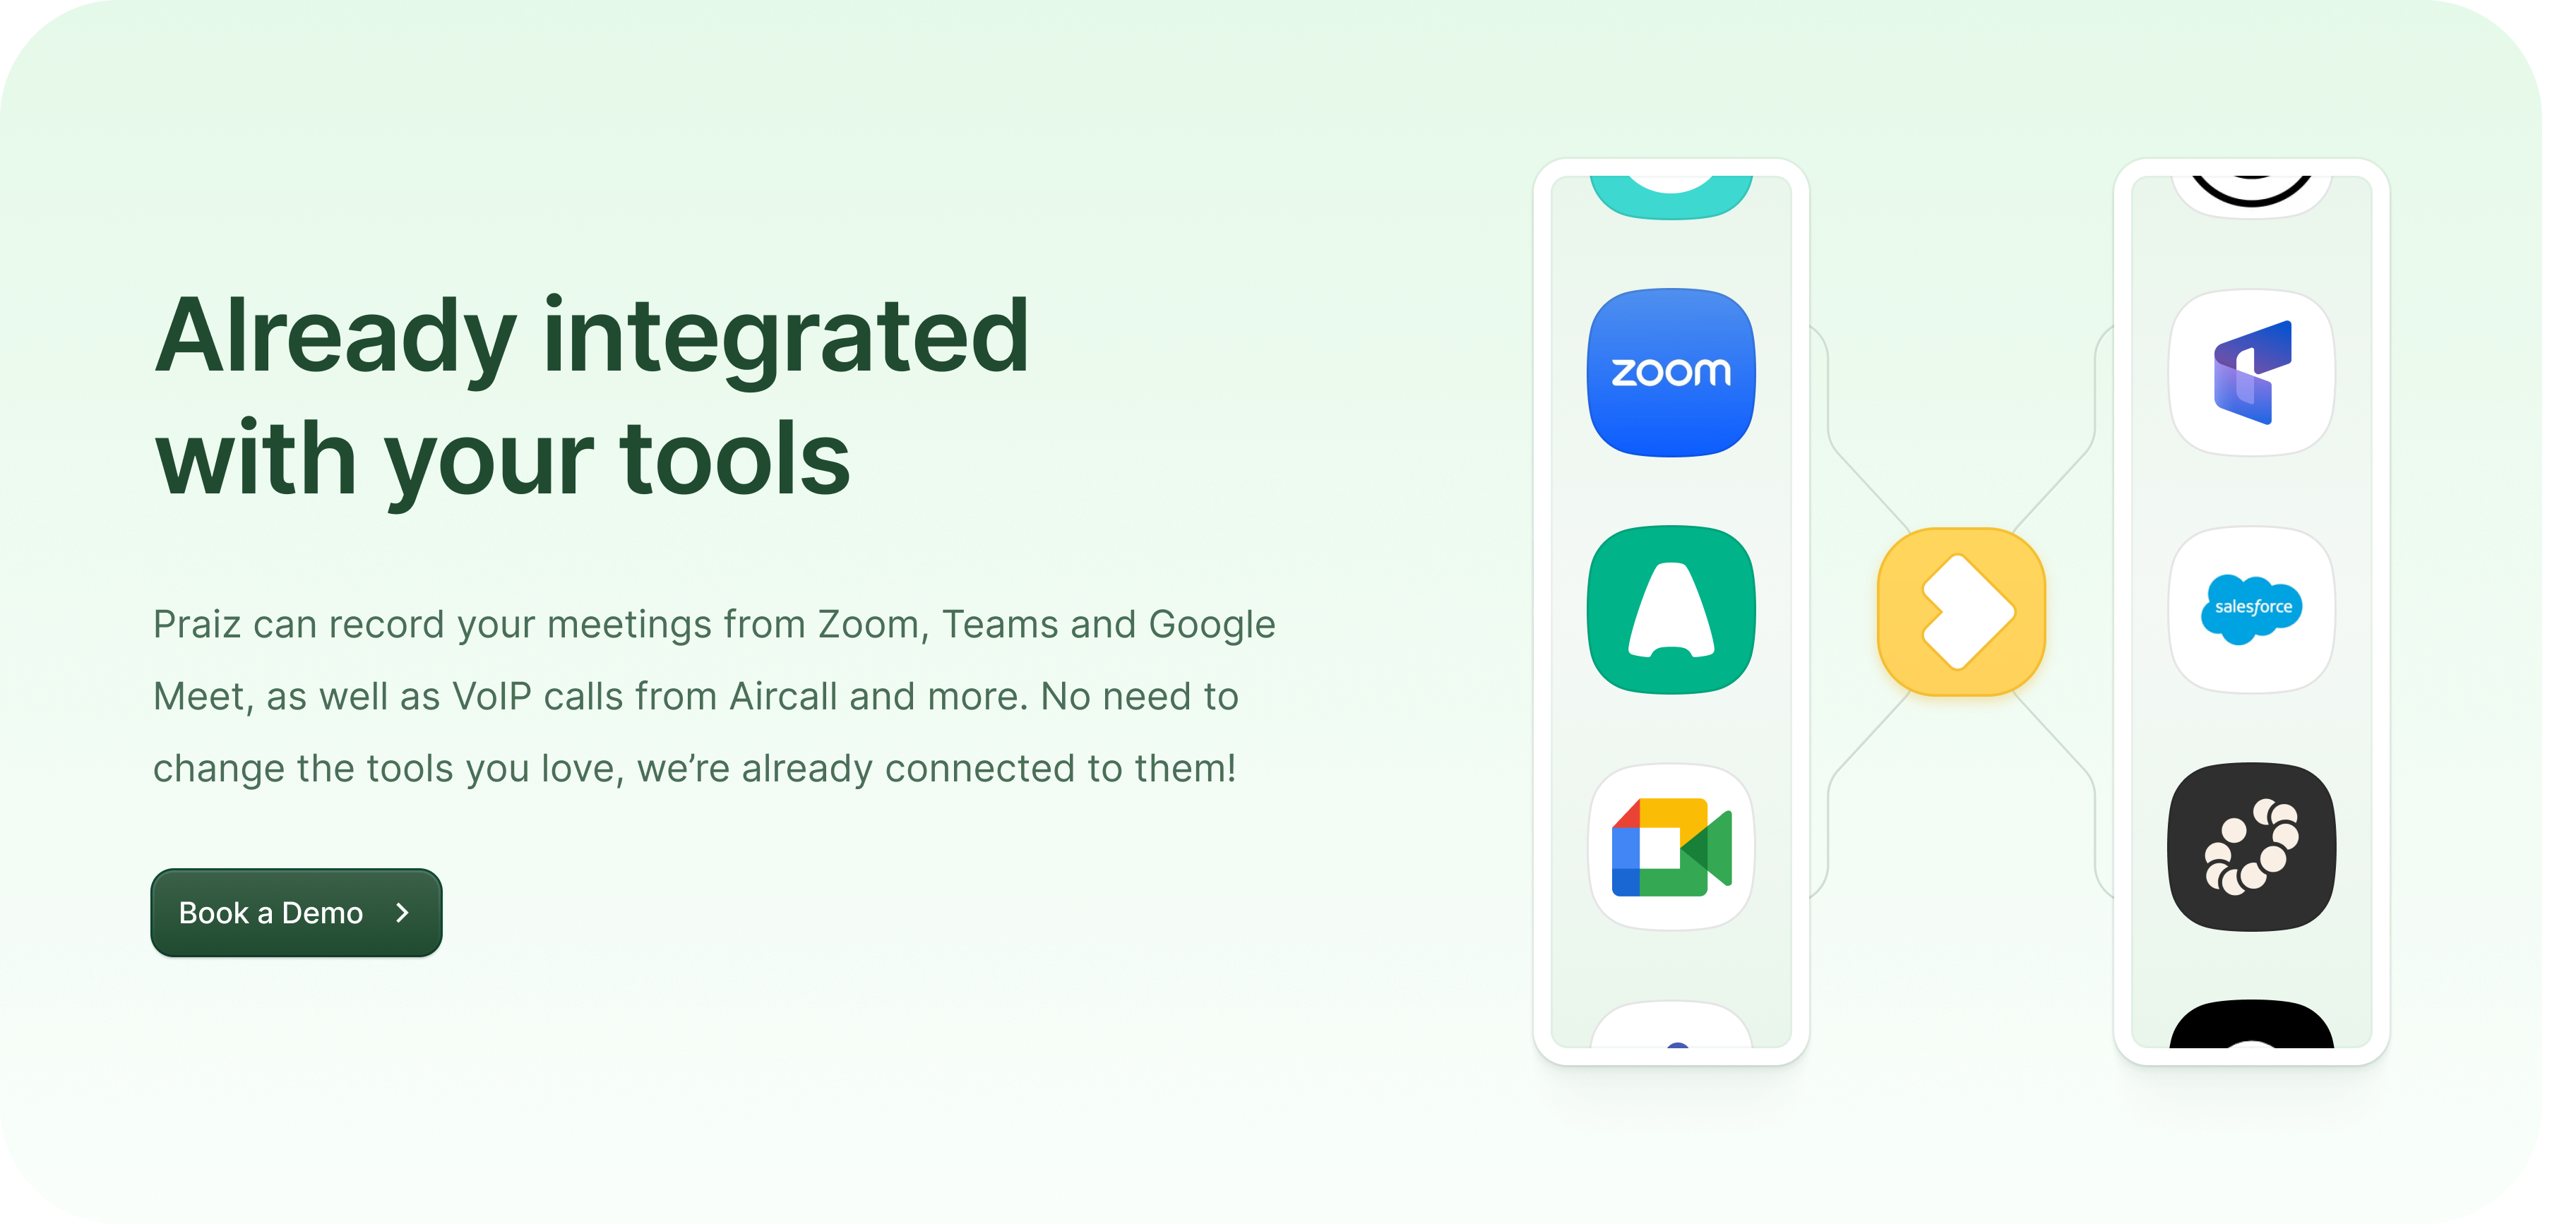 Praiz can record your meetings from Zoom, Teams and Google Meet, as well as VoIP calls from Aircall and more. No need to change the tools you love, we’re already connected to them!